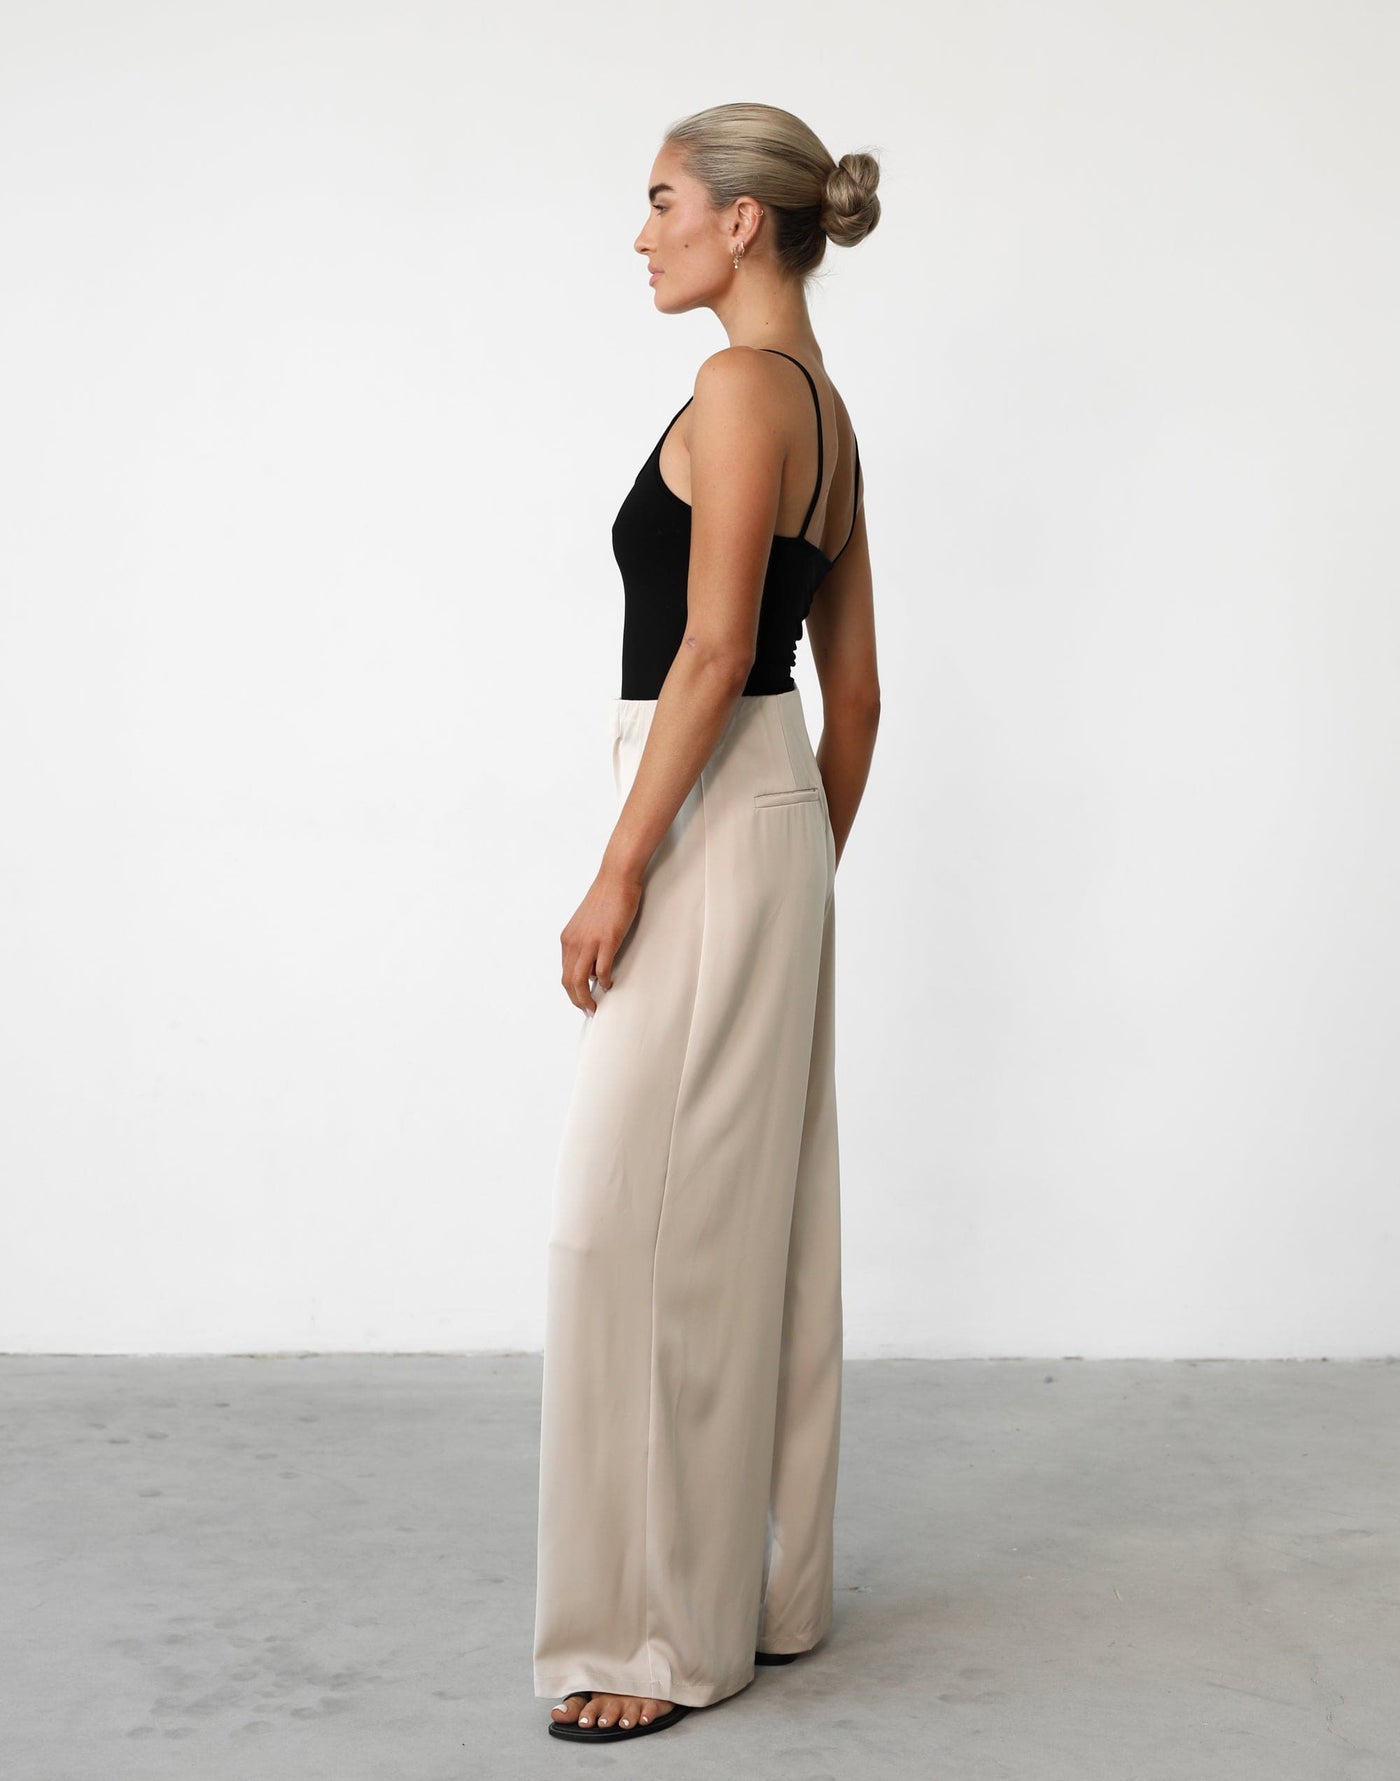 Yzabelle Pants (Beige) - Satin High Waisted Wide Leg Pant - Women's Pants - Charcoal Clothing